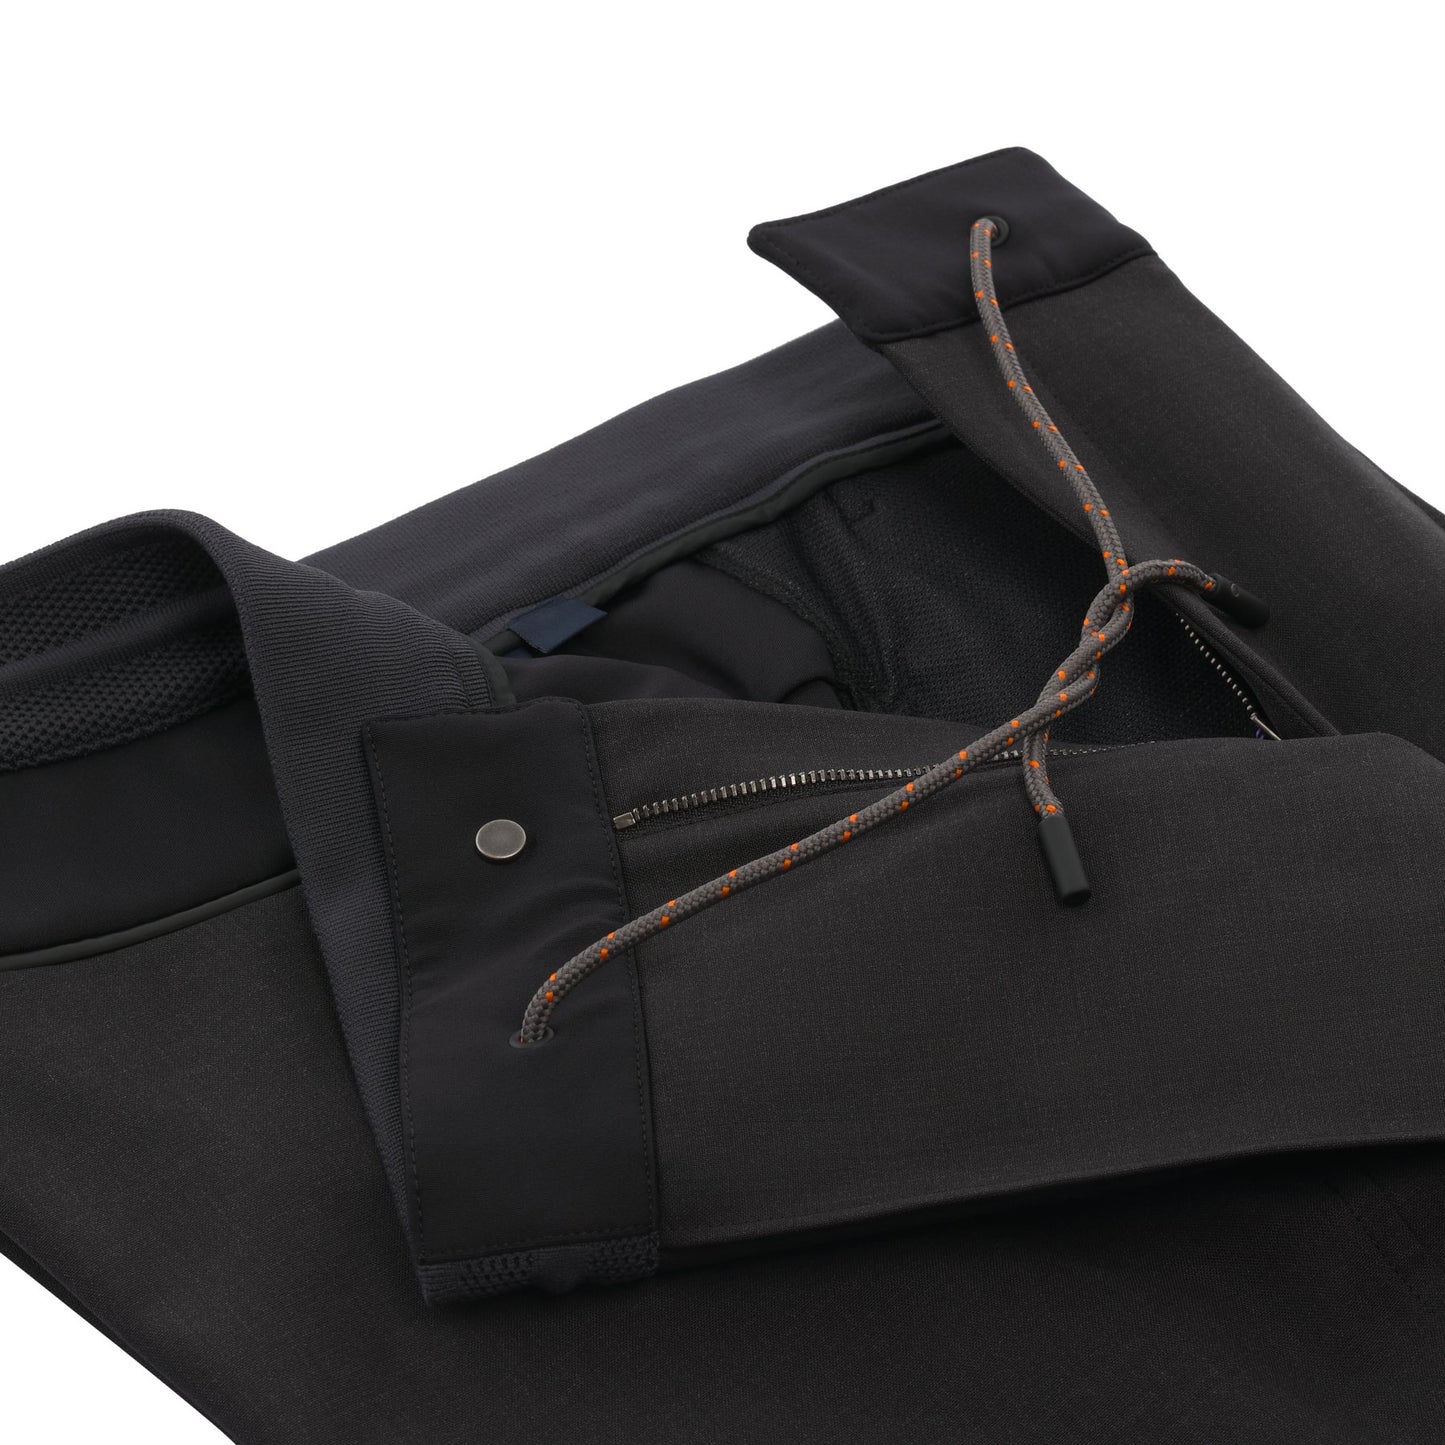 Sease Stretch - Virgin Wool and Nylon - Blend Bonded Trousers in Graphite Grey - SARTALE